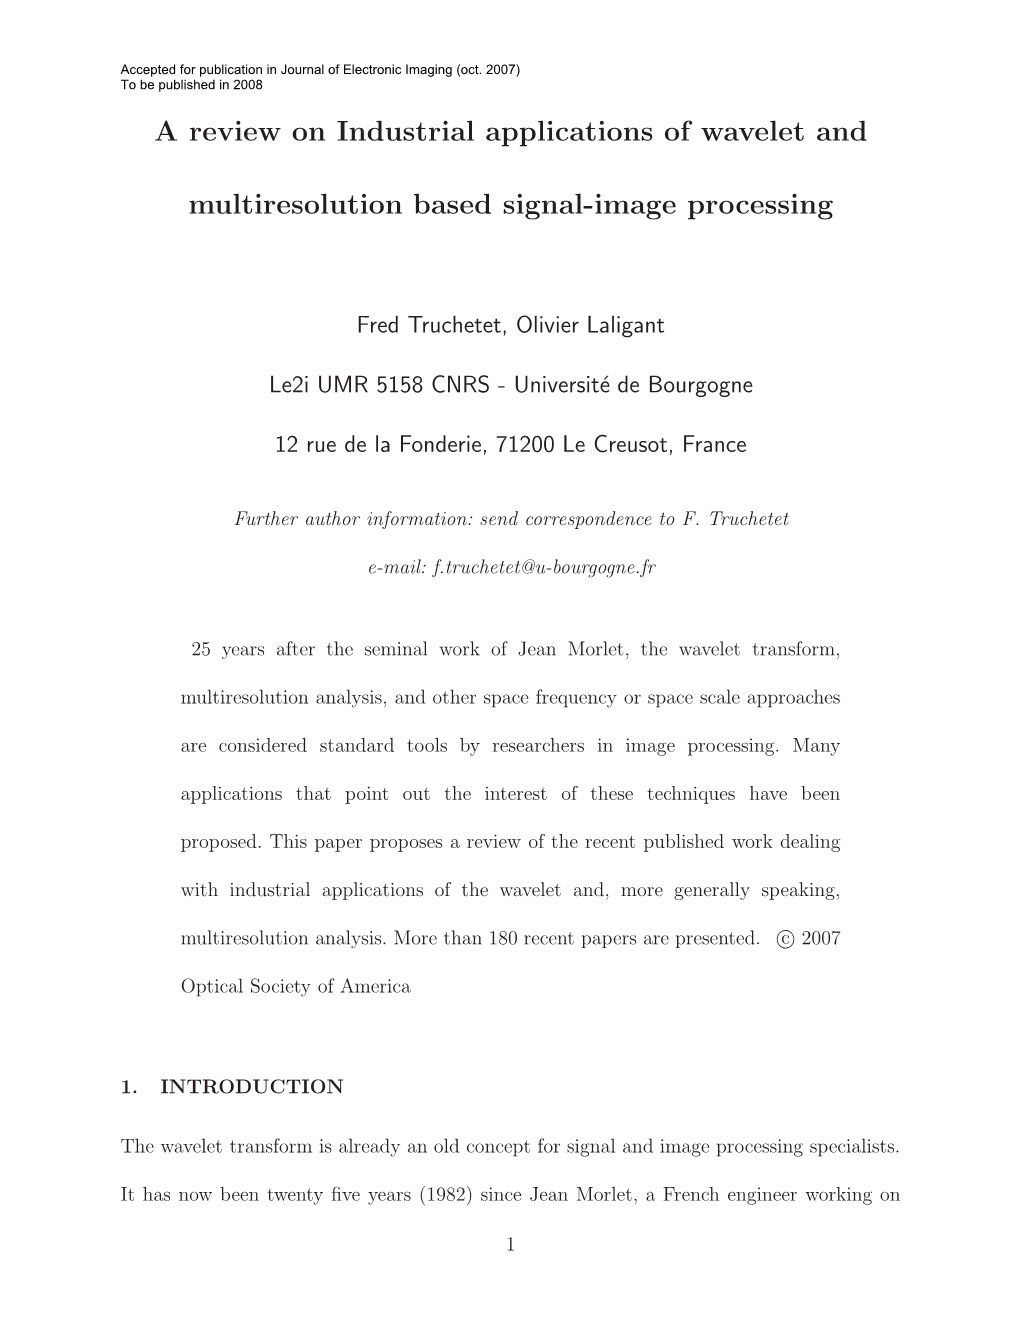 A Review on Industrial Applications of Wavelet and Multiresolution Based Signal-Image Processing